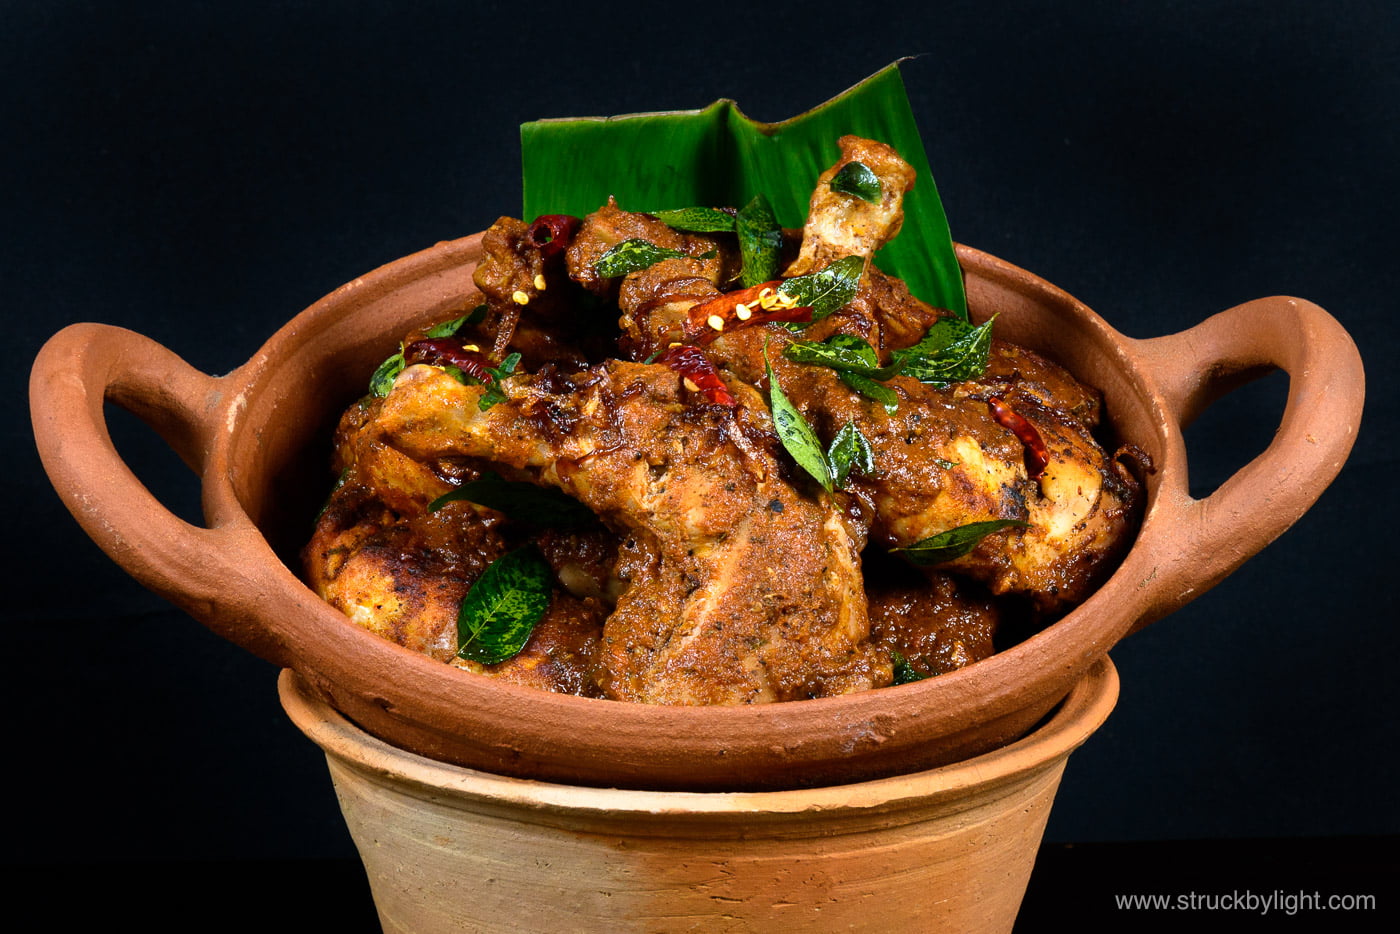 A Sri Lankan Chicken Curry - photographed by Dinil Abeygunawardane - sagepixels product photography and food photography services